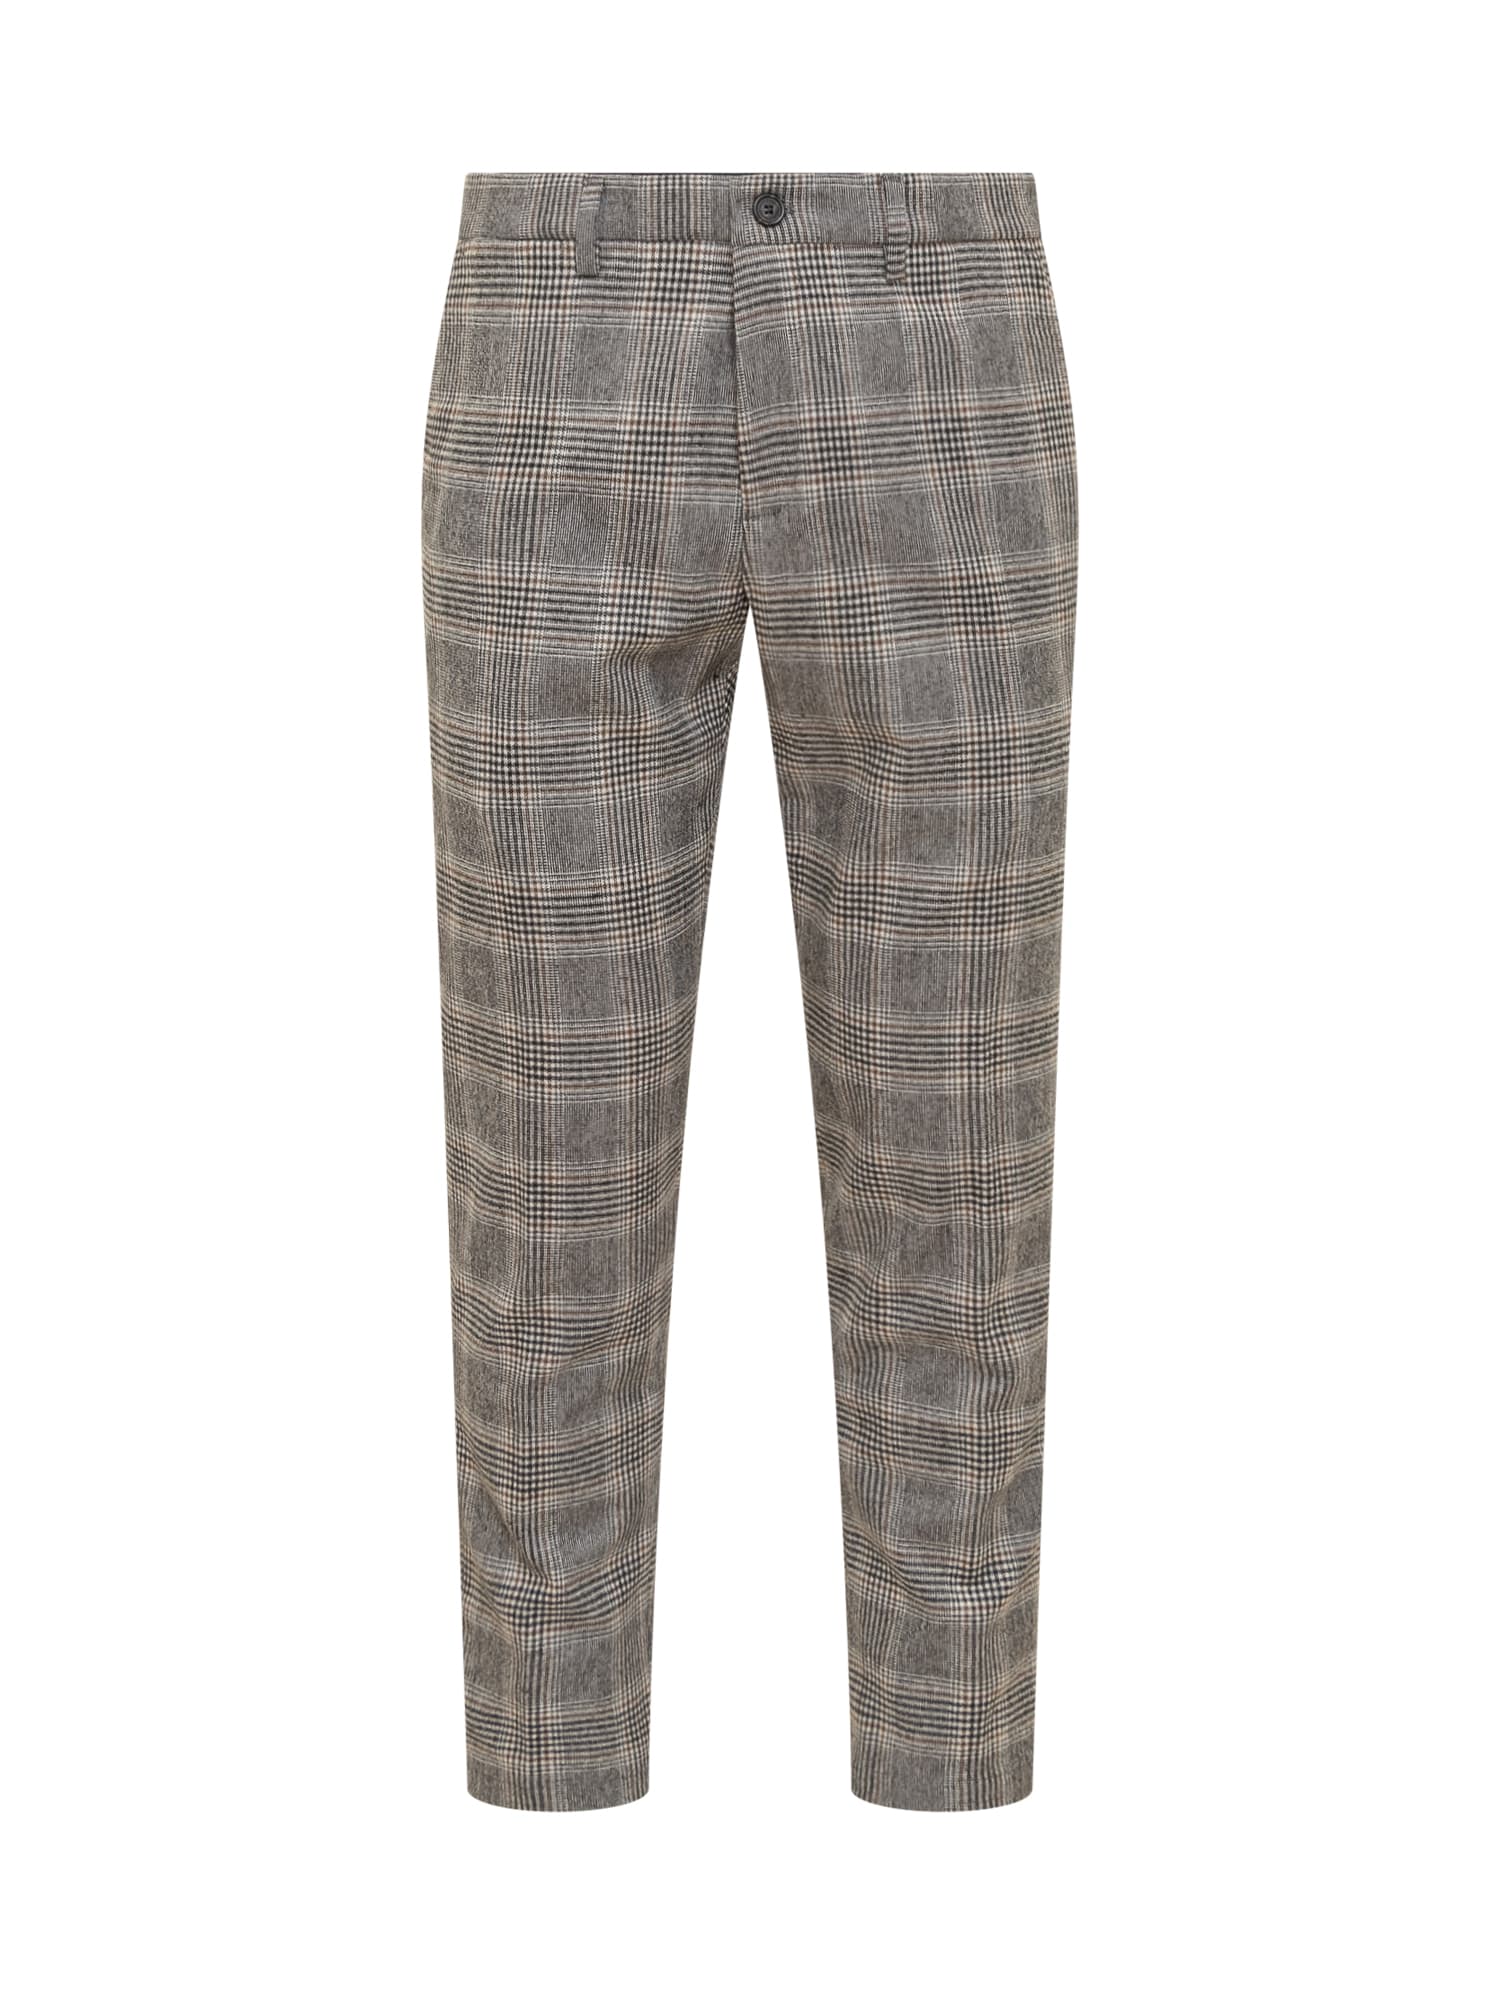 Department Five Setter Pants In Unica